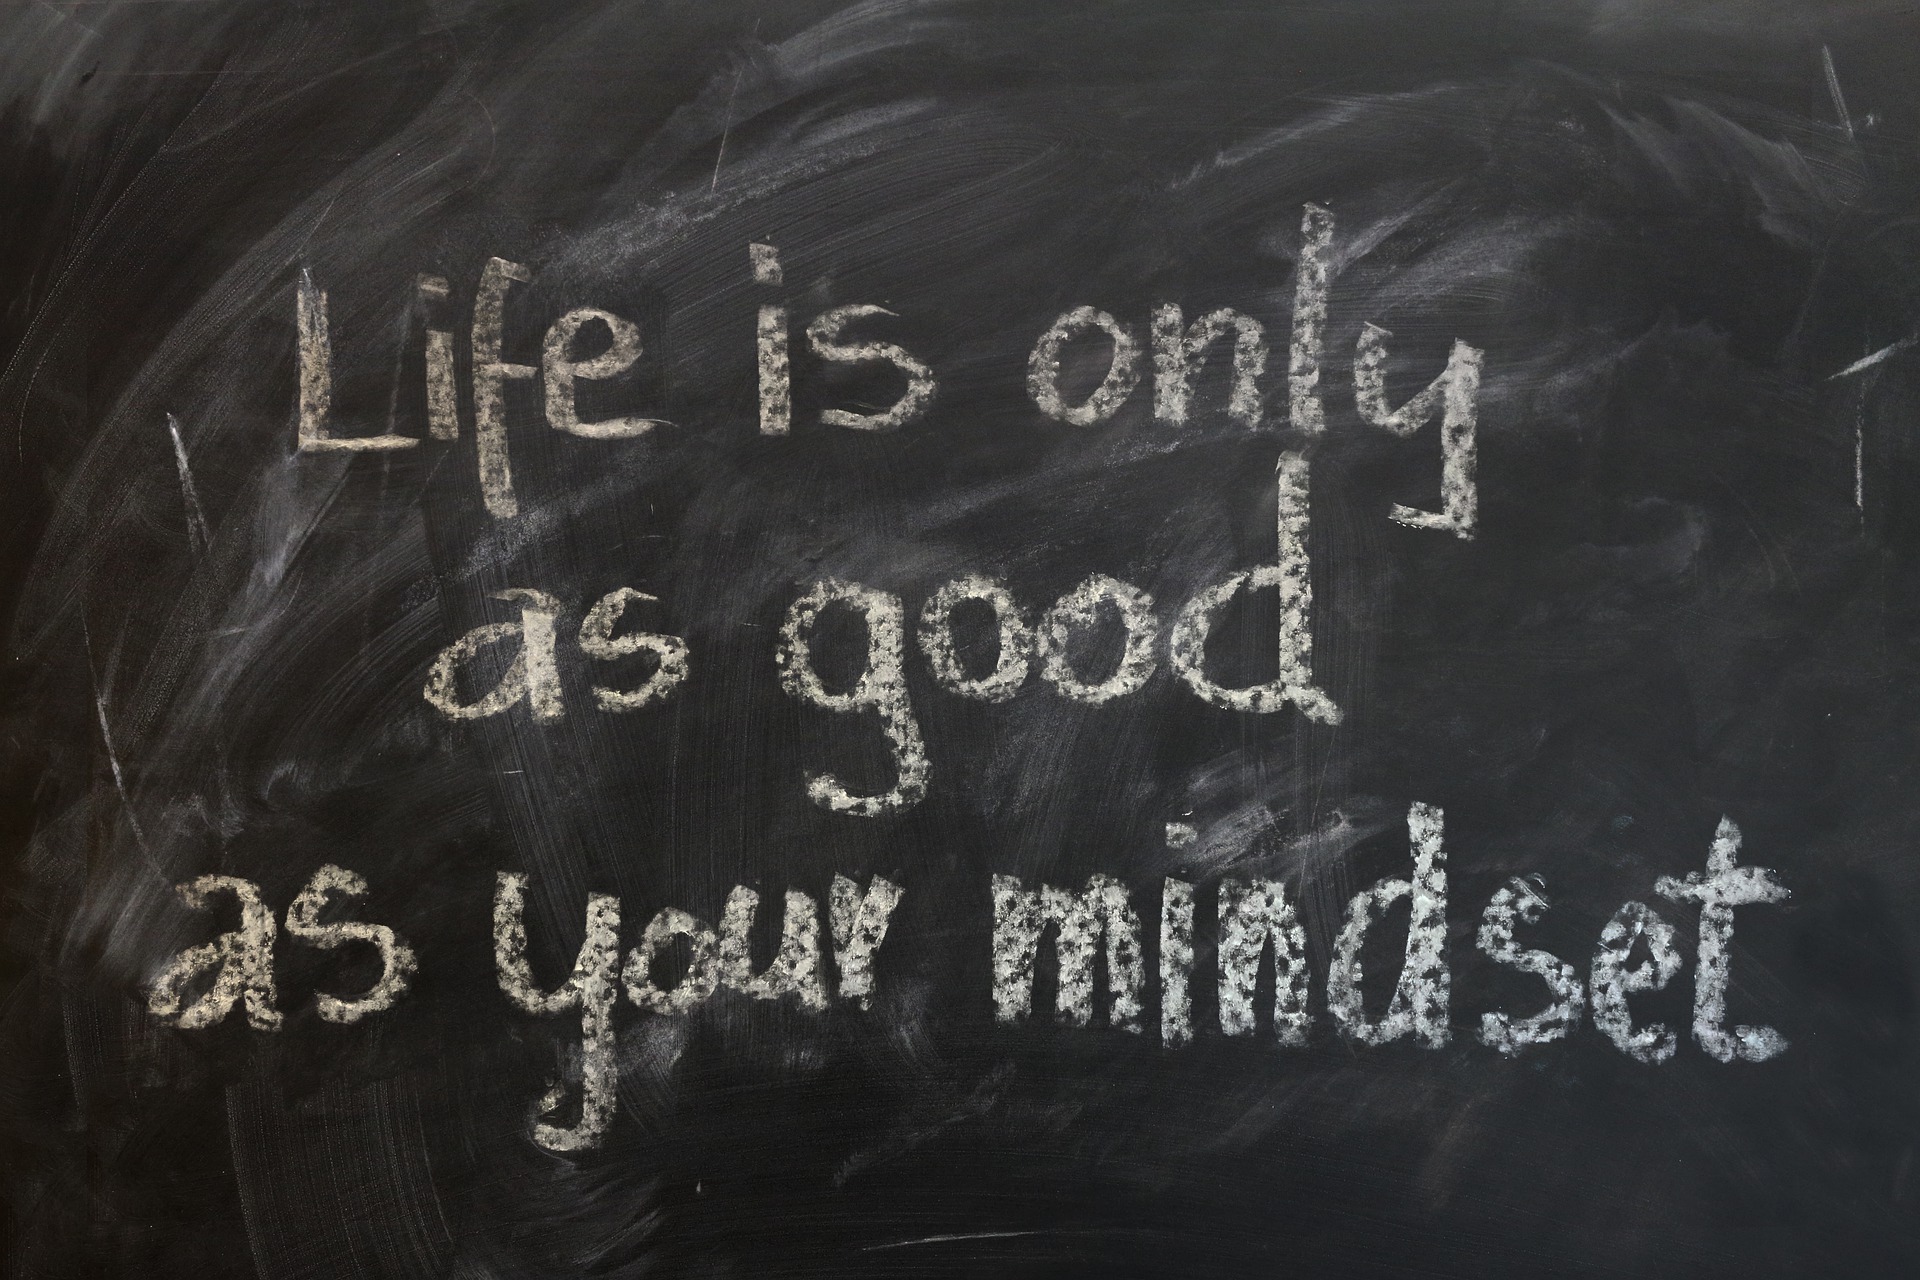 Chalkboard with "Life is only as good as your mindset" written on it